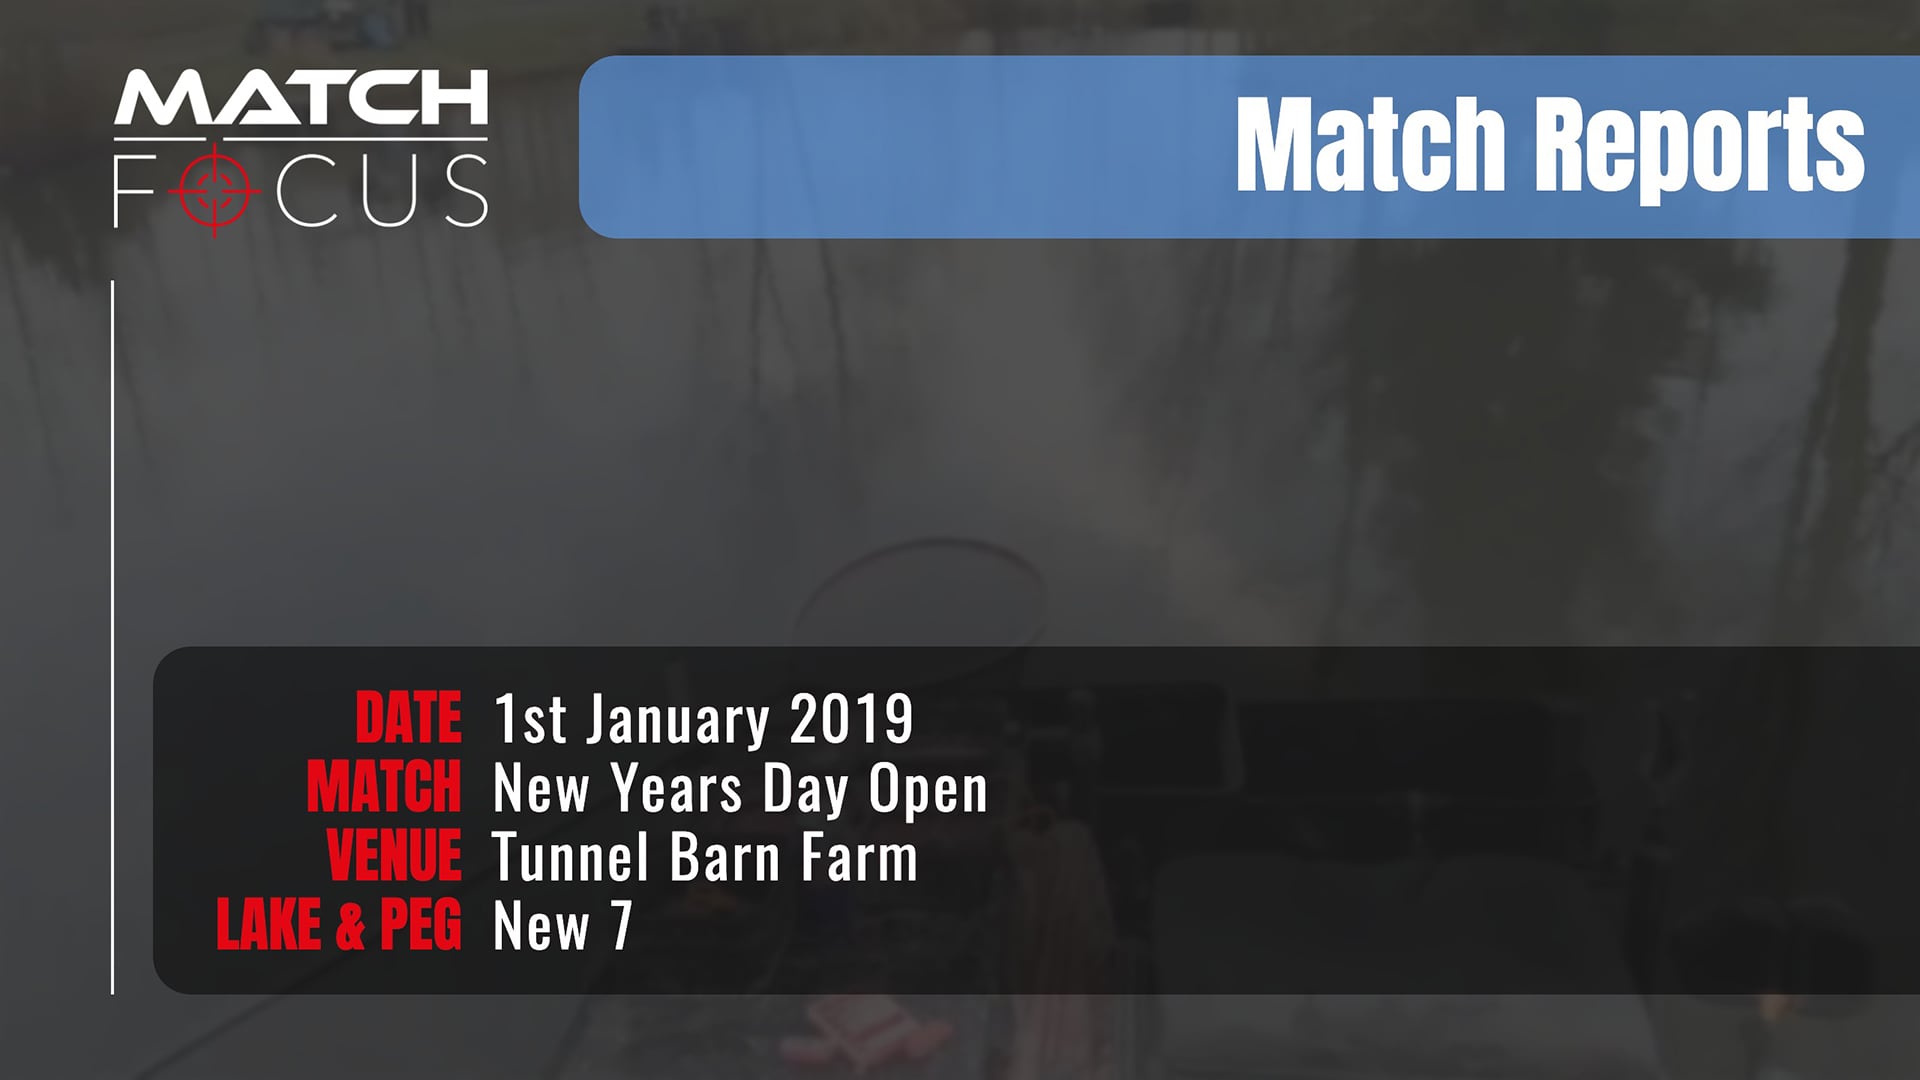 New Years Day Open – 1st January 2019 Match Report